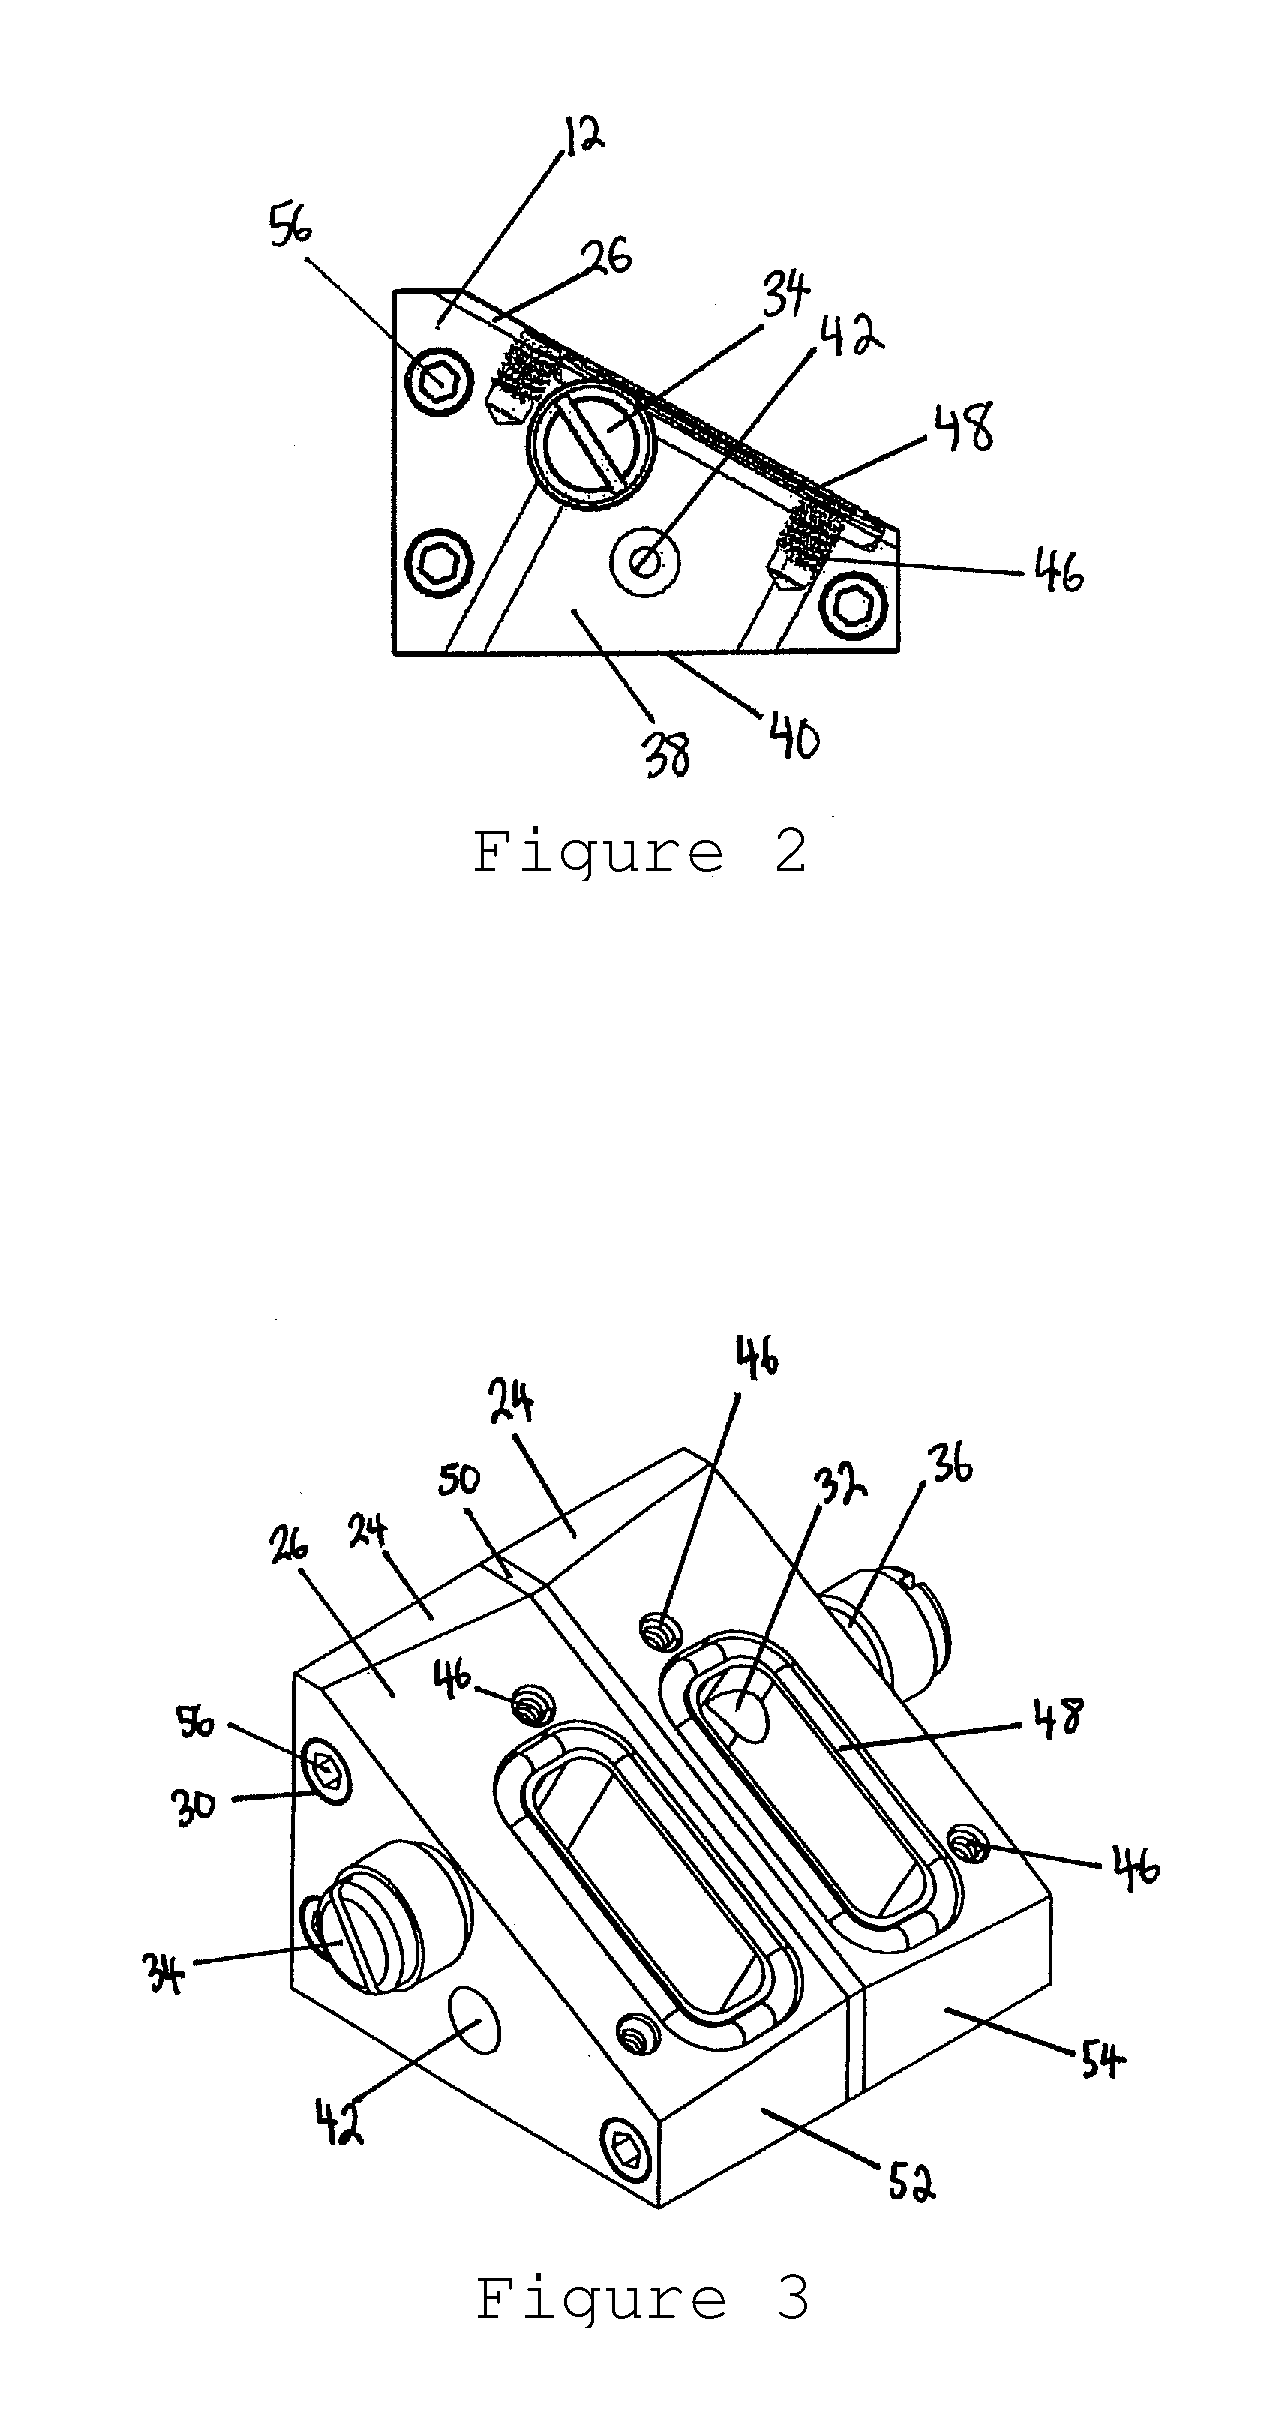 Apparatus and method for non-destructive testing using ultrasonic phased array